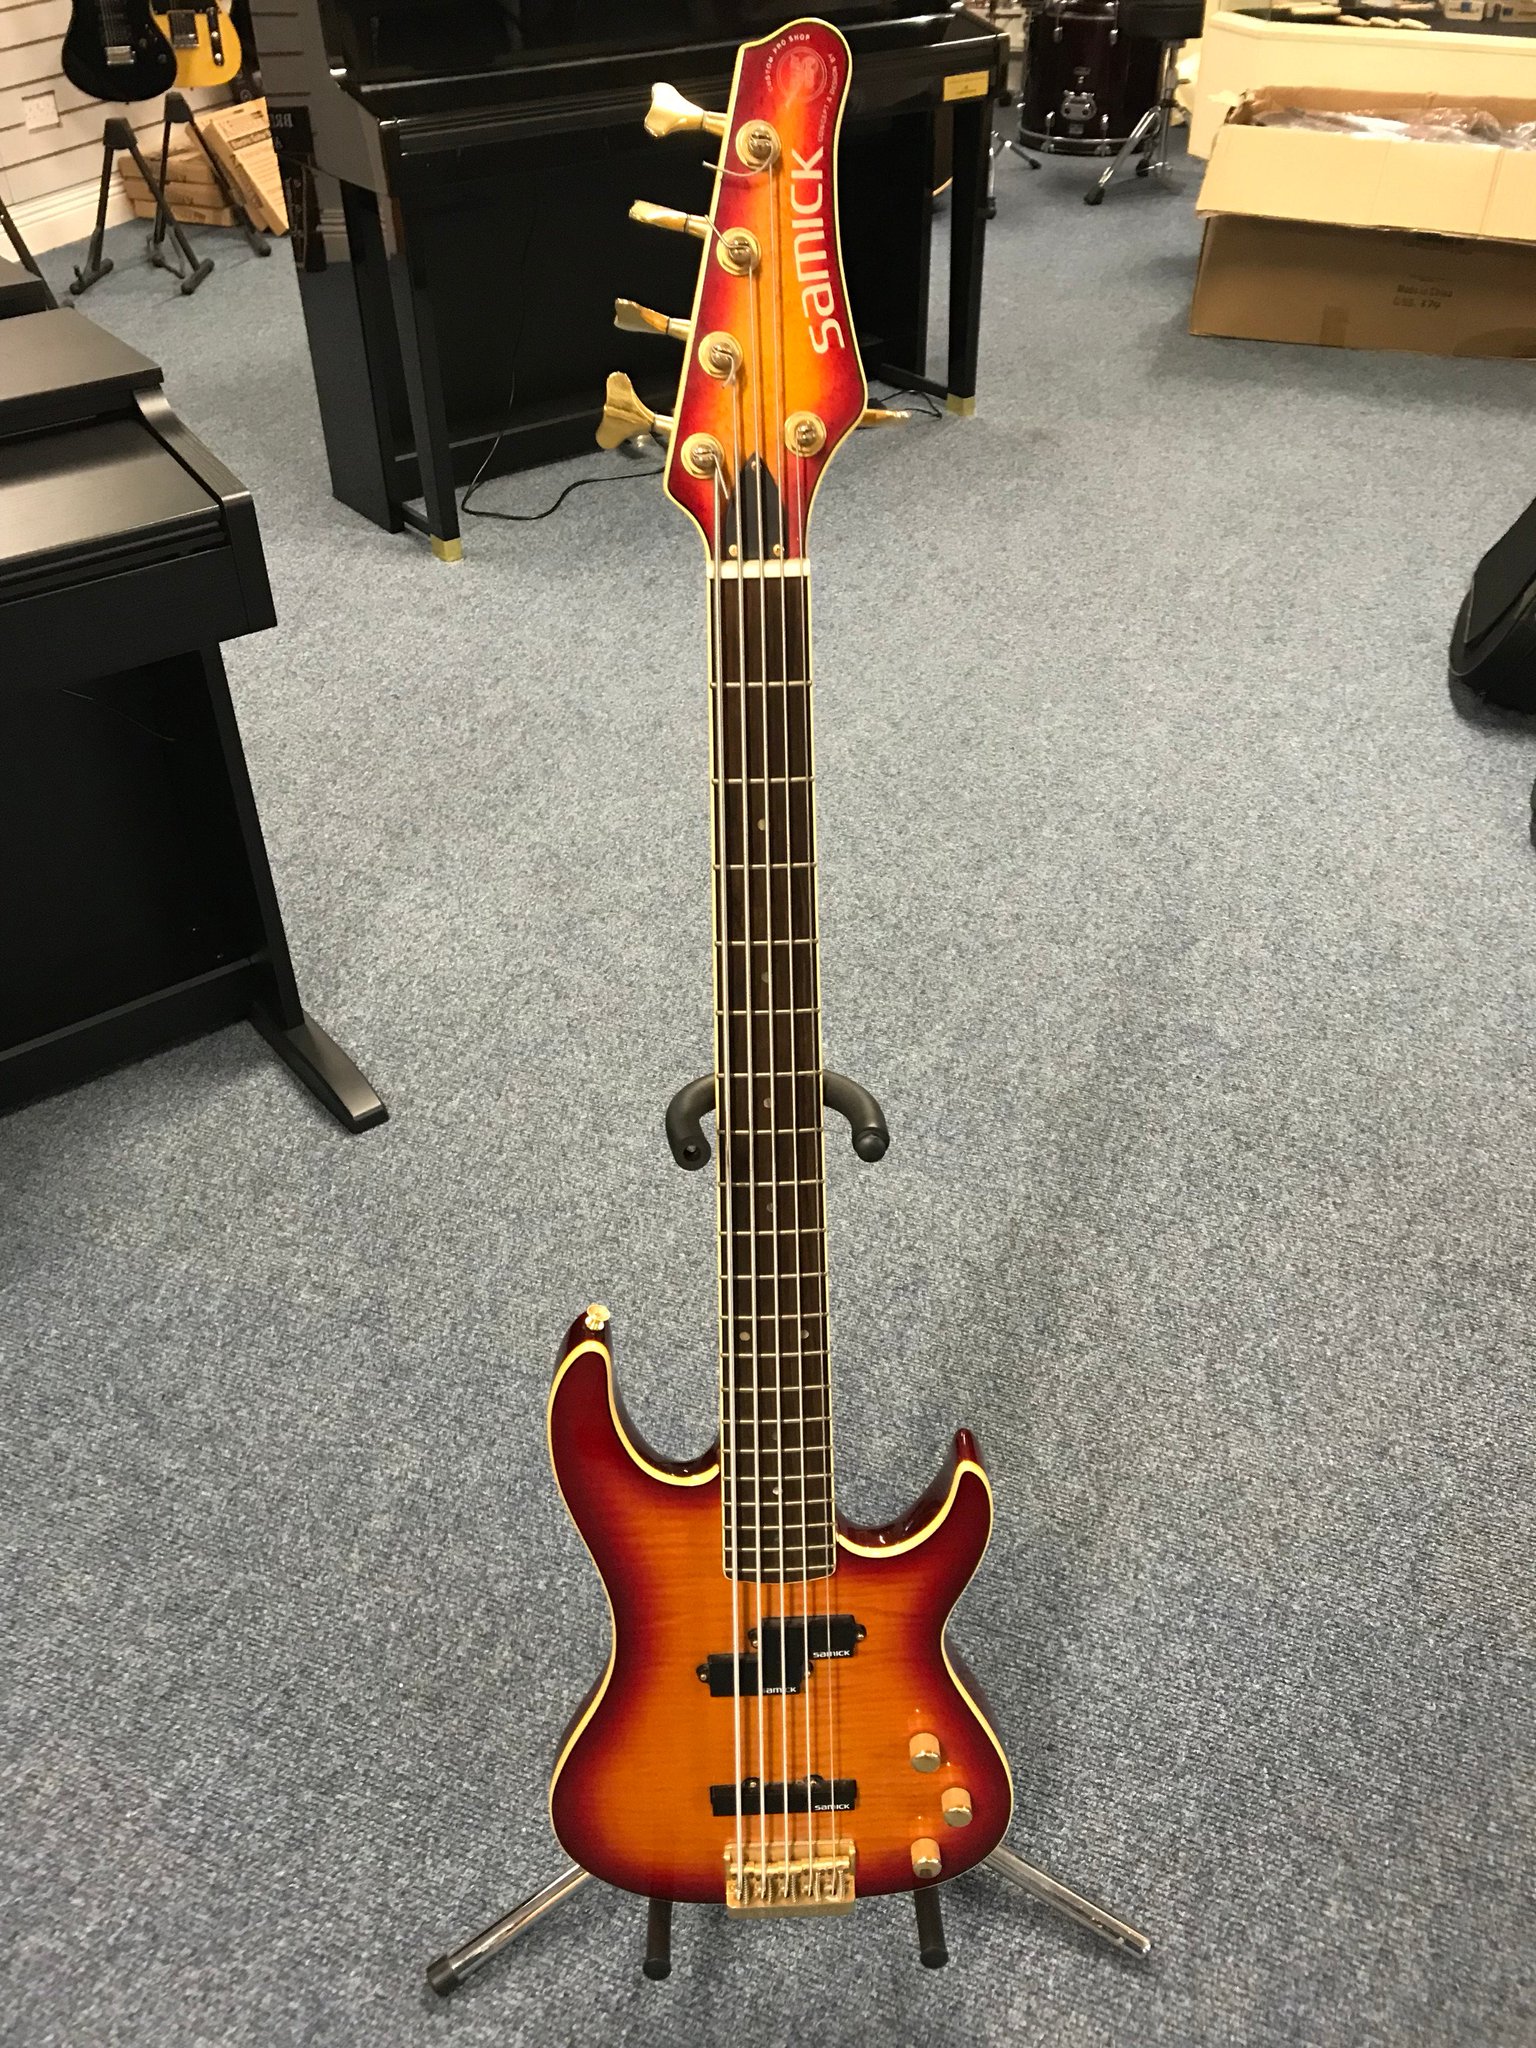 Betaling Udfordring kubiske Culbertson Music on Twitter: "Here is an interesting one from a few years  ago. A Samick 5 string bass designed by Valley Arts. Call in for a play at  Culbertson Music Coleraine